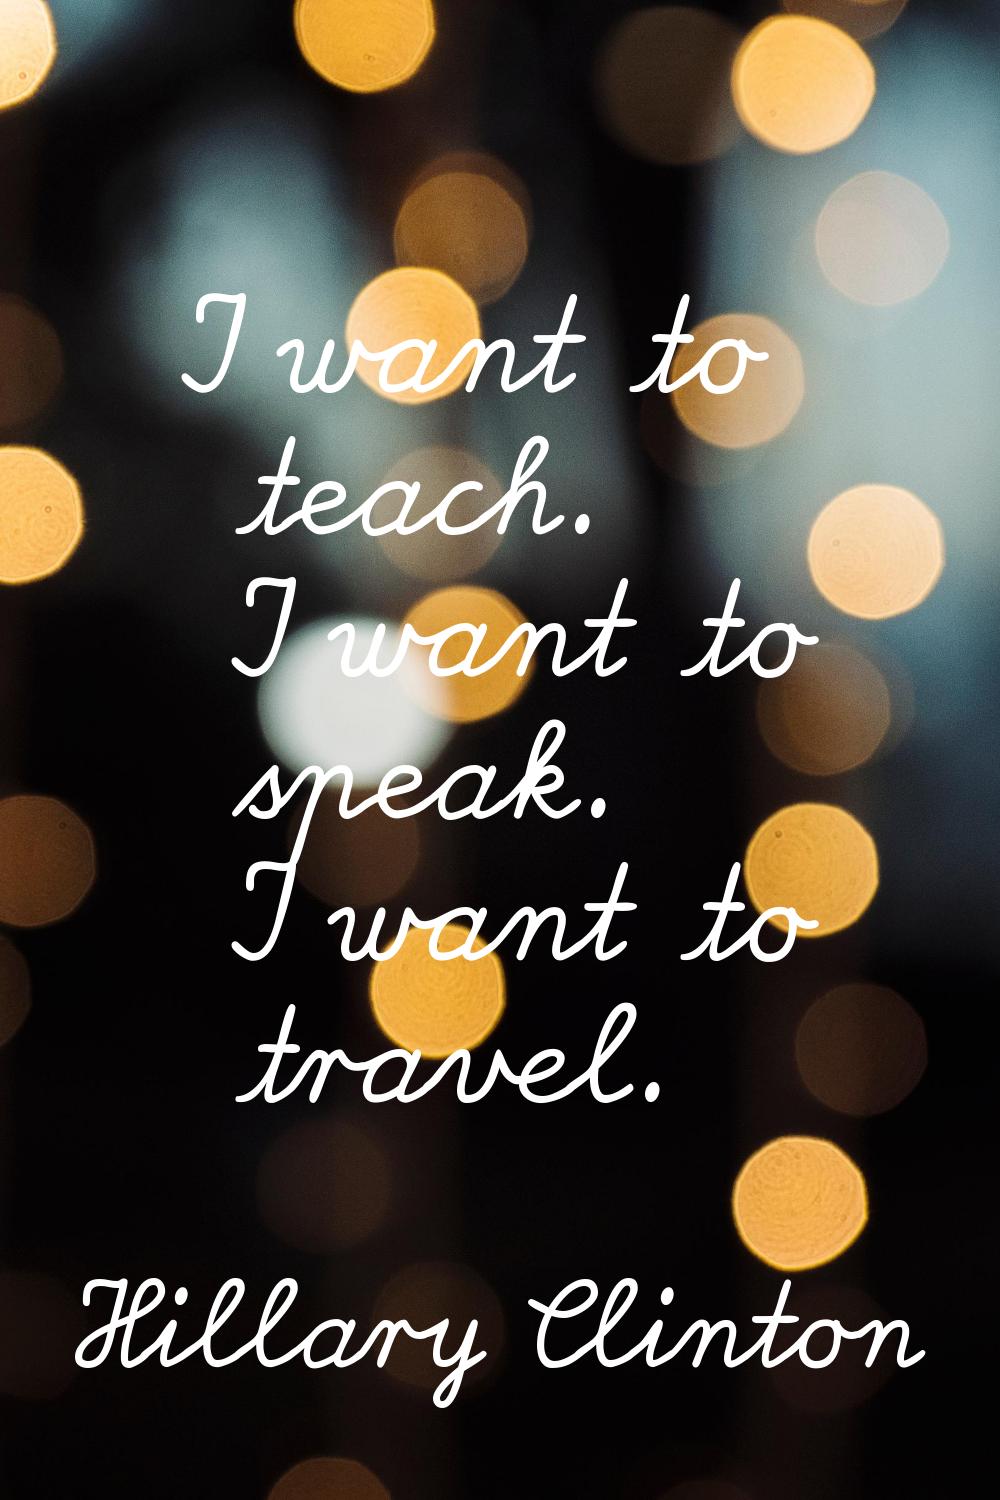 I want to teach. I want to speak. I want to travel.